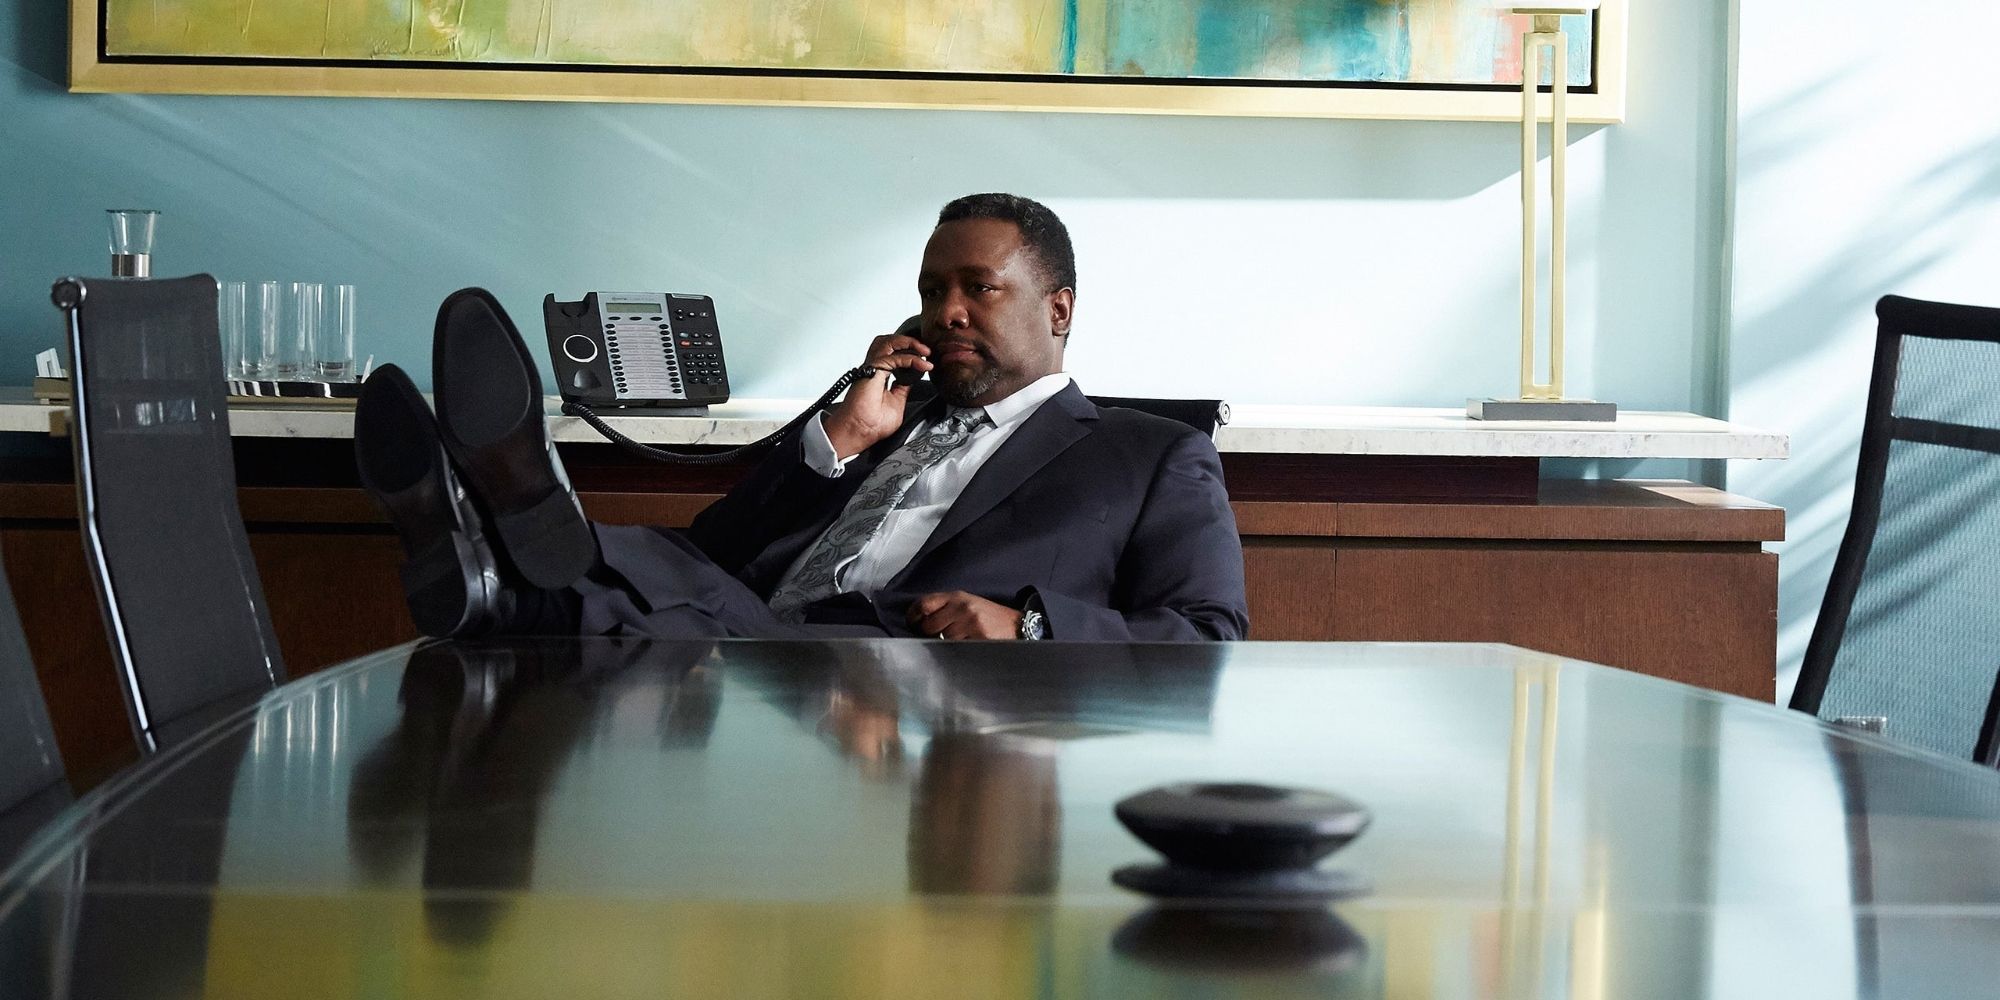 Robert Zane with his feet up in Suits season 5 episode No Refills